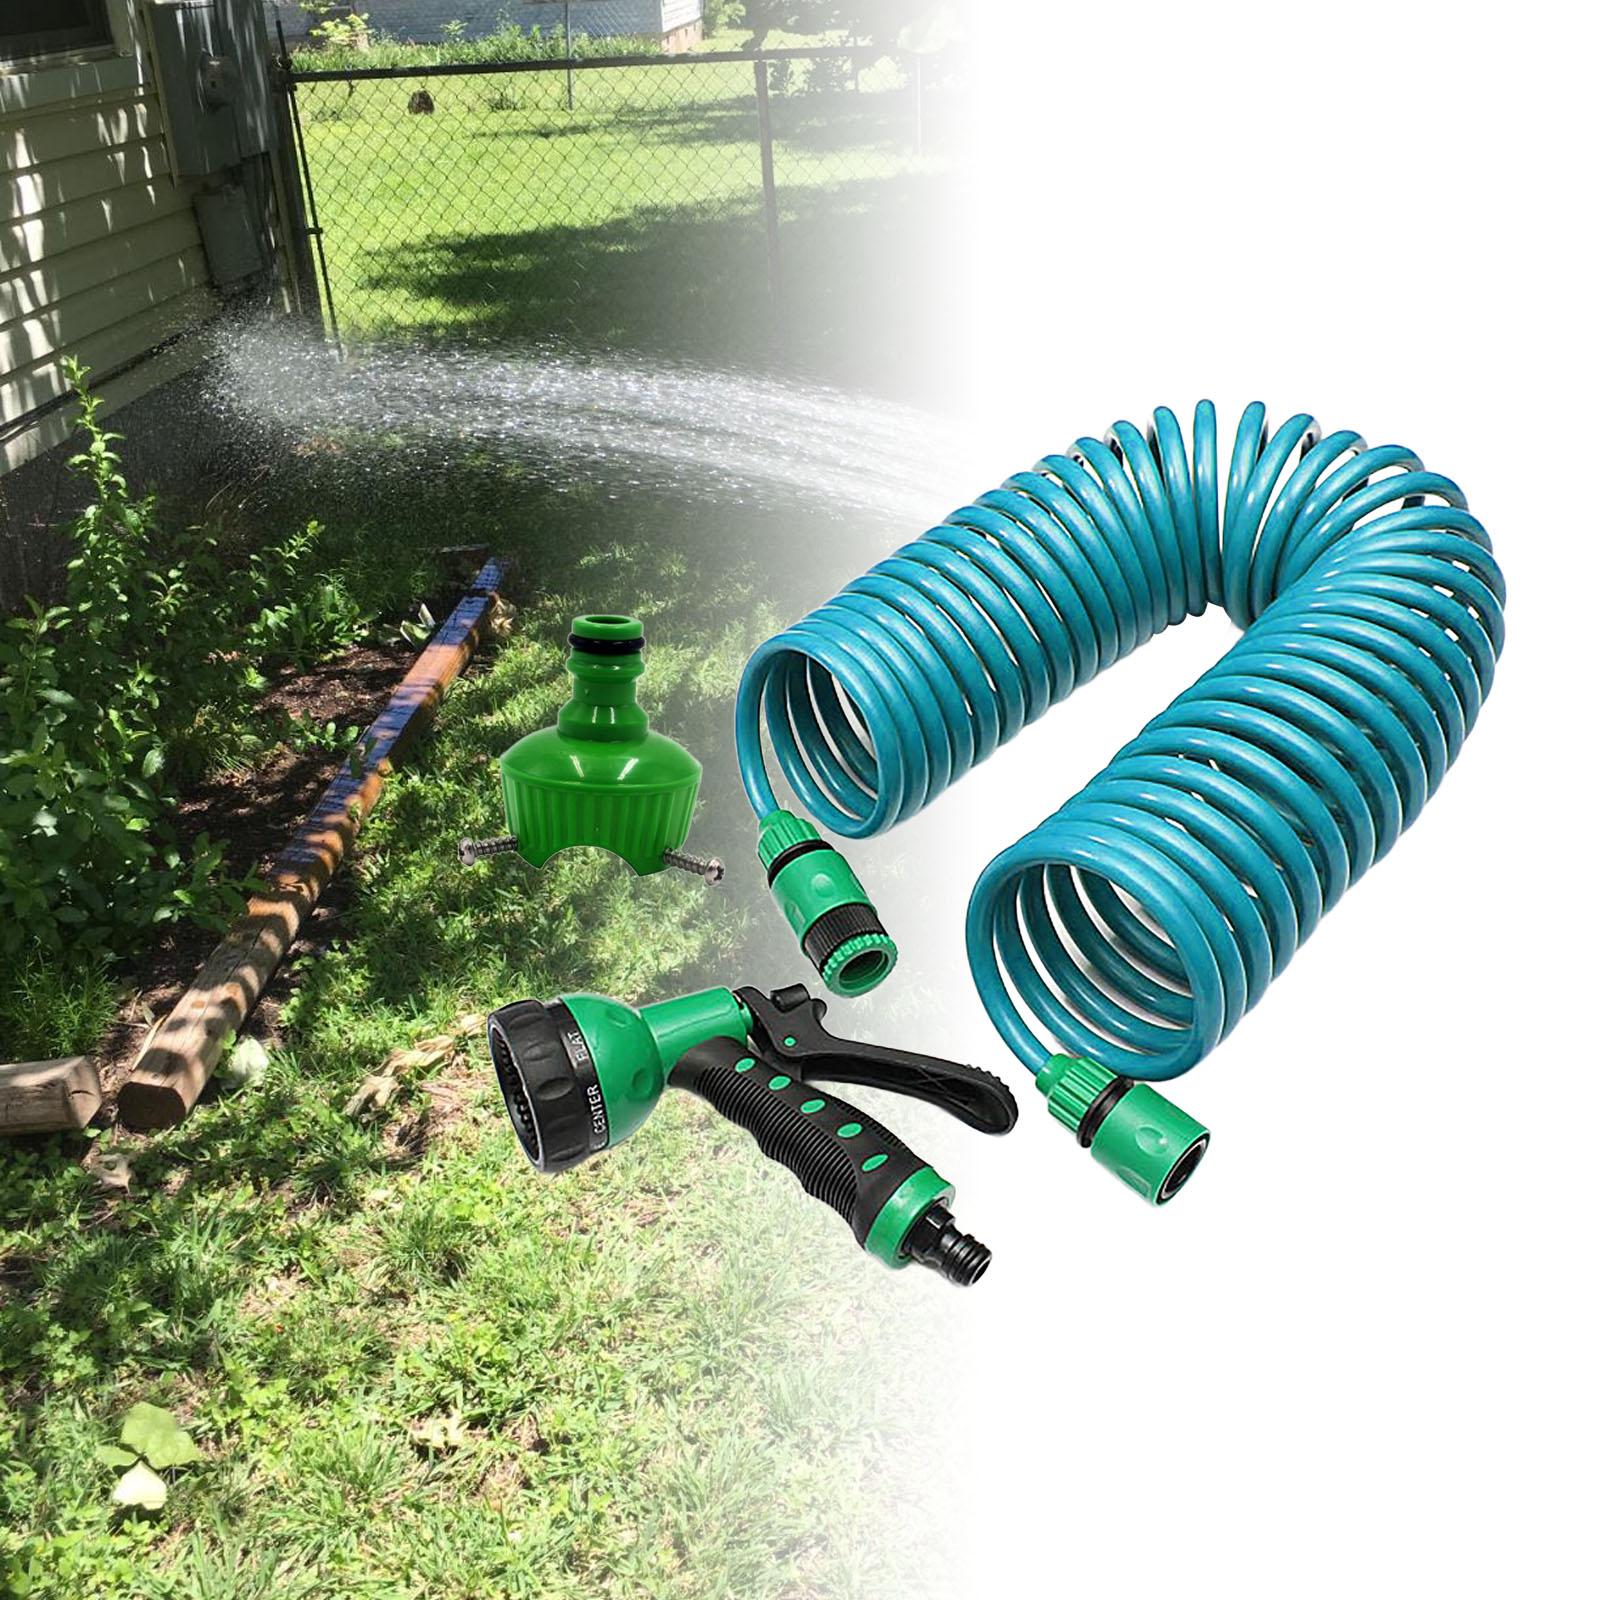 Garden Watering Hose Nozzle Portable for Lawn Fruit and Vegetable Irrigation 7.5M